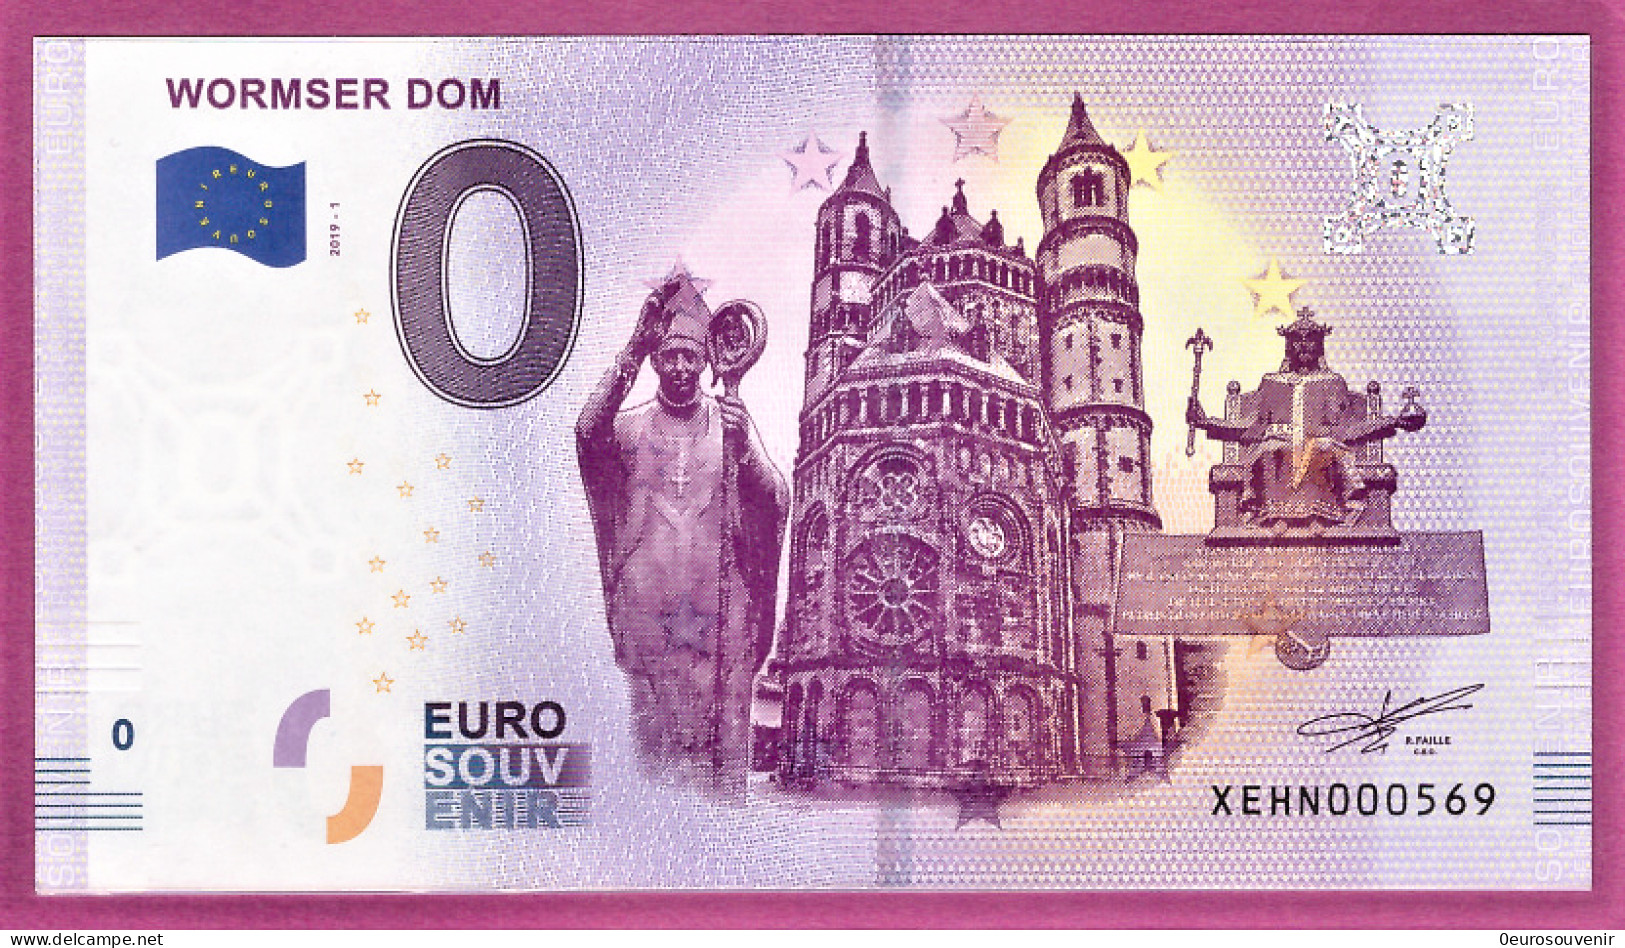 0-Euro XEHN 2019-1 WORMSER DOM - Private Proofs / Unofficial